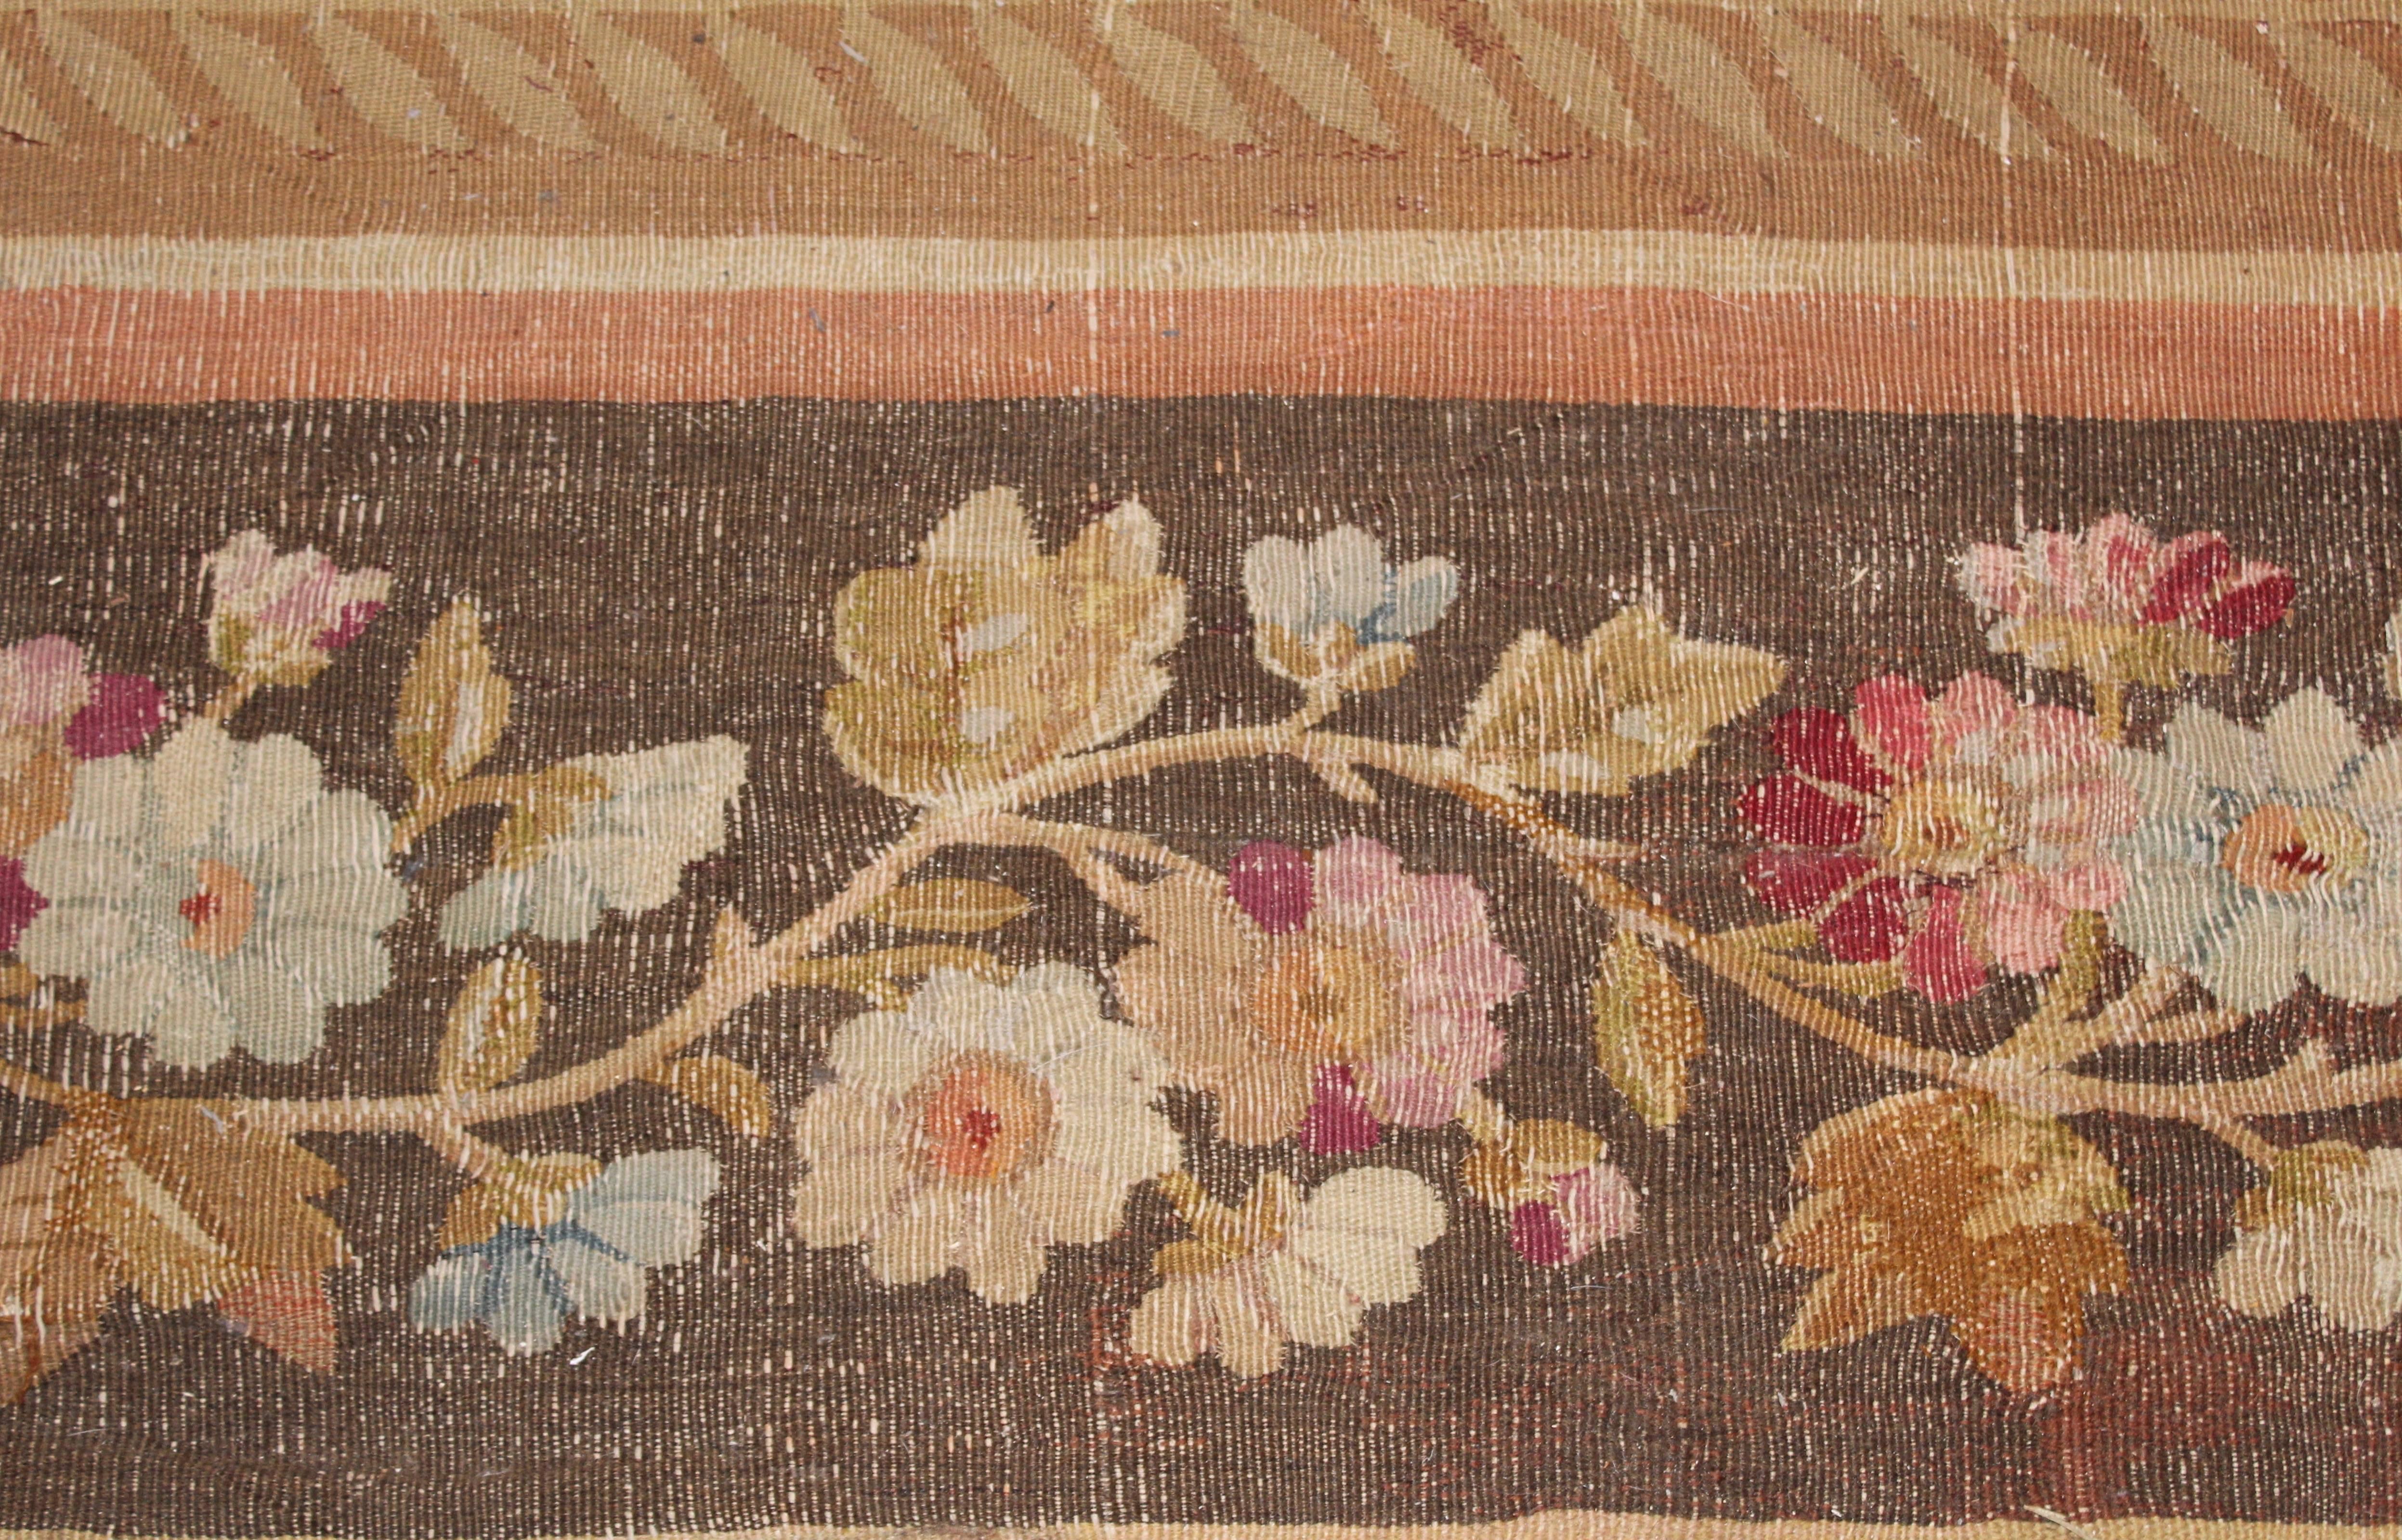 Large Charles X Aubusson woven wool carpet, France, circa 1830. The main focus of this detailed Aubusson carpet is the central, symmetrical flower of geometric patterning, surrounded by a floral wreath. Floral swags emanate from curling flowerpot